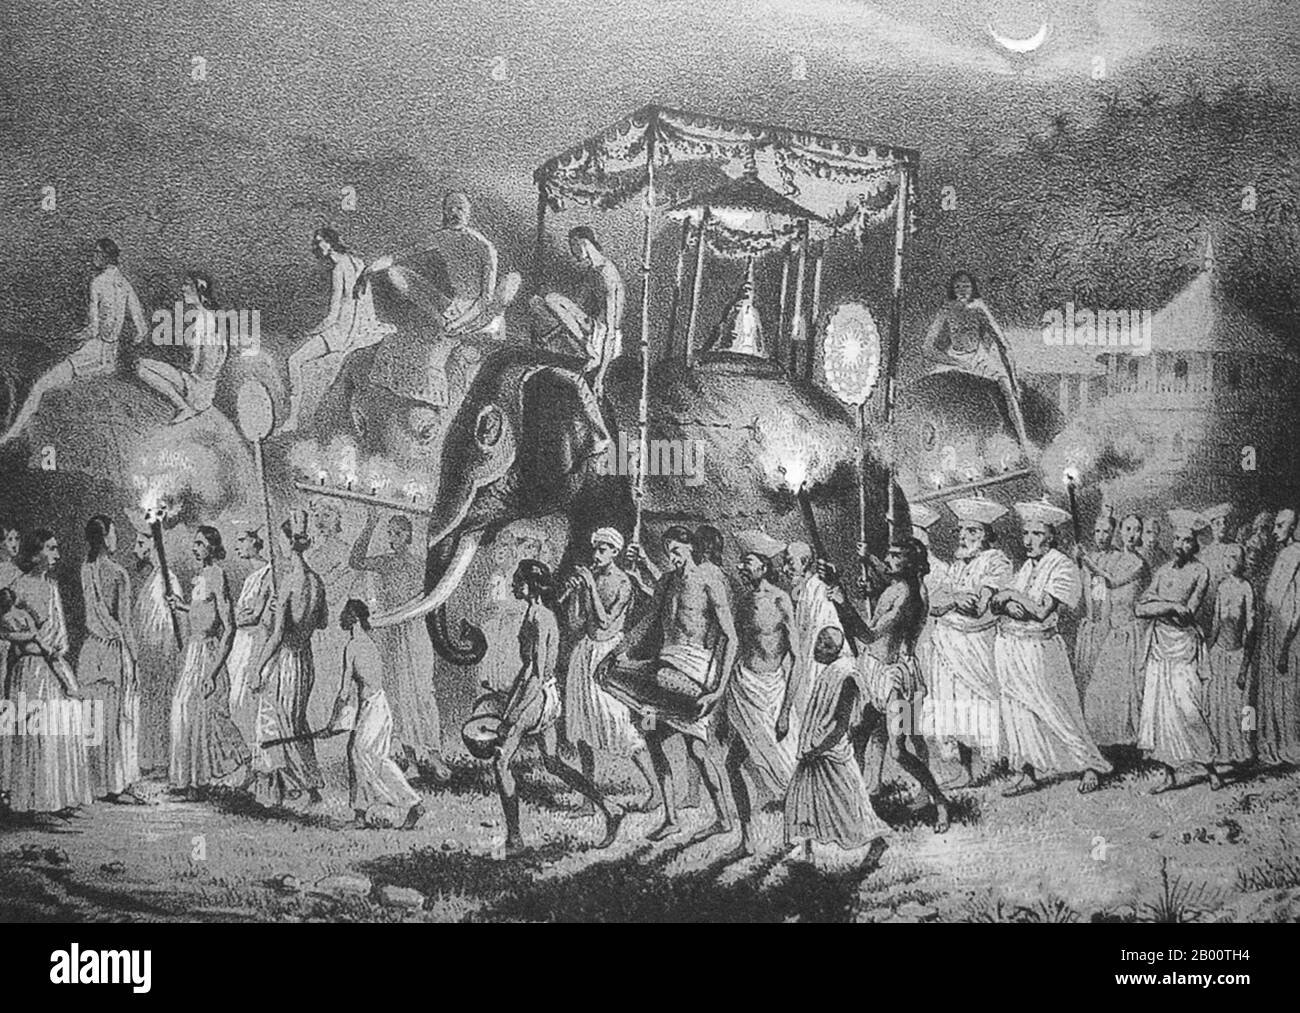 Sri Lanka: Esala Perahera procession by night, Kandy, 1841.  The Esala Perahera or ‘Festival of the Tooth’ held annually in Kandy is believed to be a fusion of two separate but interconnected ‘Perahera’ (Processions), The Esala and Dalada. The Esala Perahera which is thought to date back to the 3rd century BCE, was a ritual enacted to request the gods for rainfall. The Dalada Perahera is believed to have begun when the Sacred Tooth Relic of the Buddha was brought to Sri Lanka from India during the 4th Century CE. Stock Photo